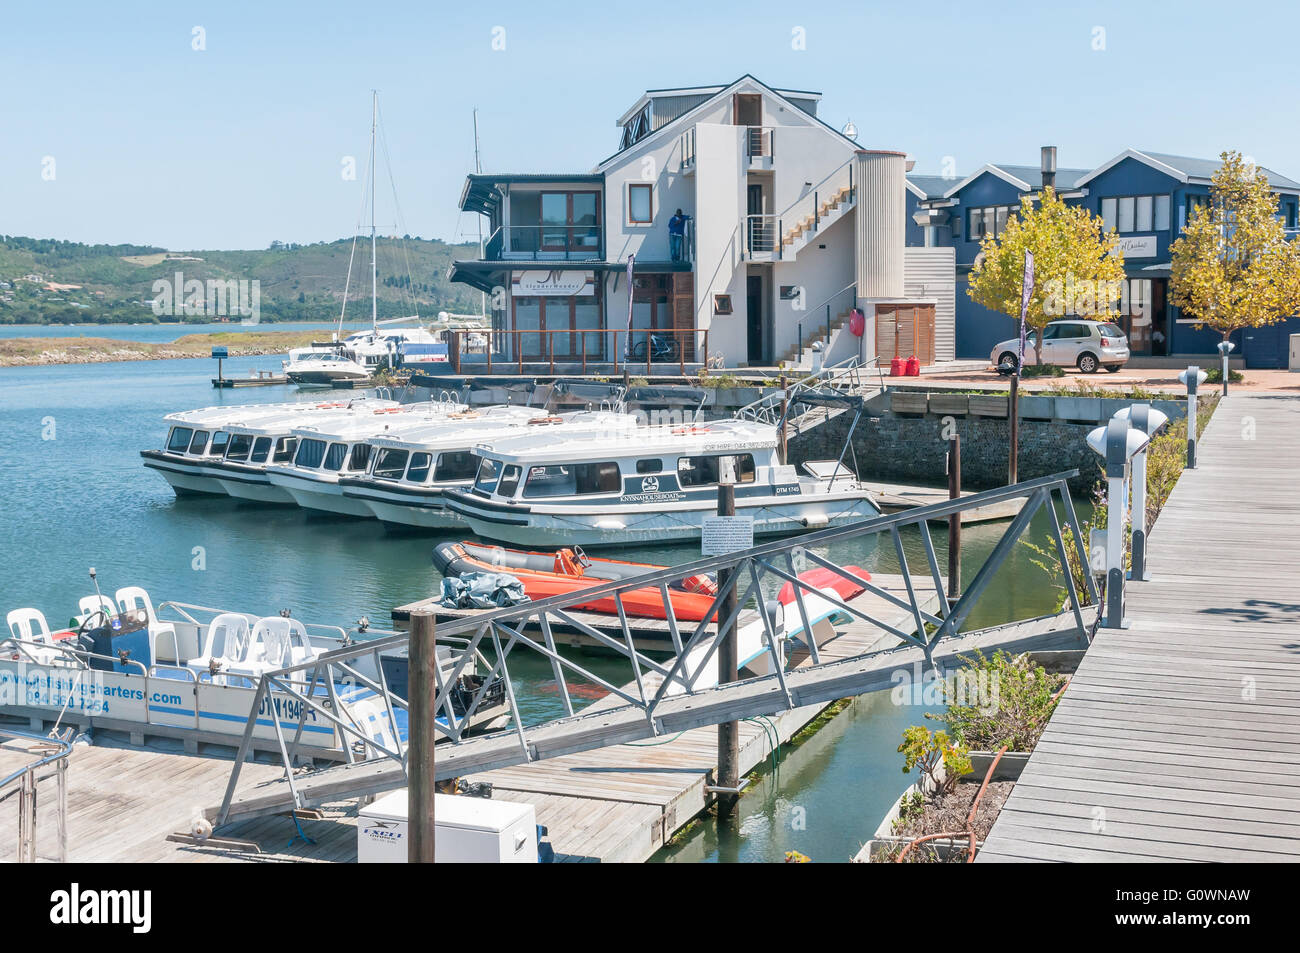 KNYSNA, SOUTH AFRICA - MARCH 3, 2016: The Harbor Town on the historic Thesens Island. Stock Photo